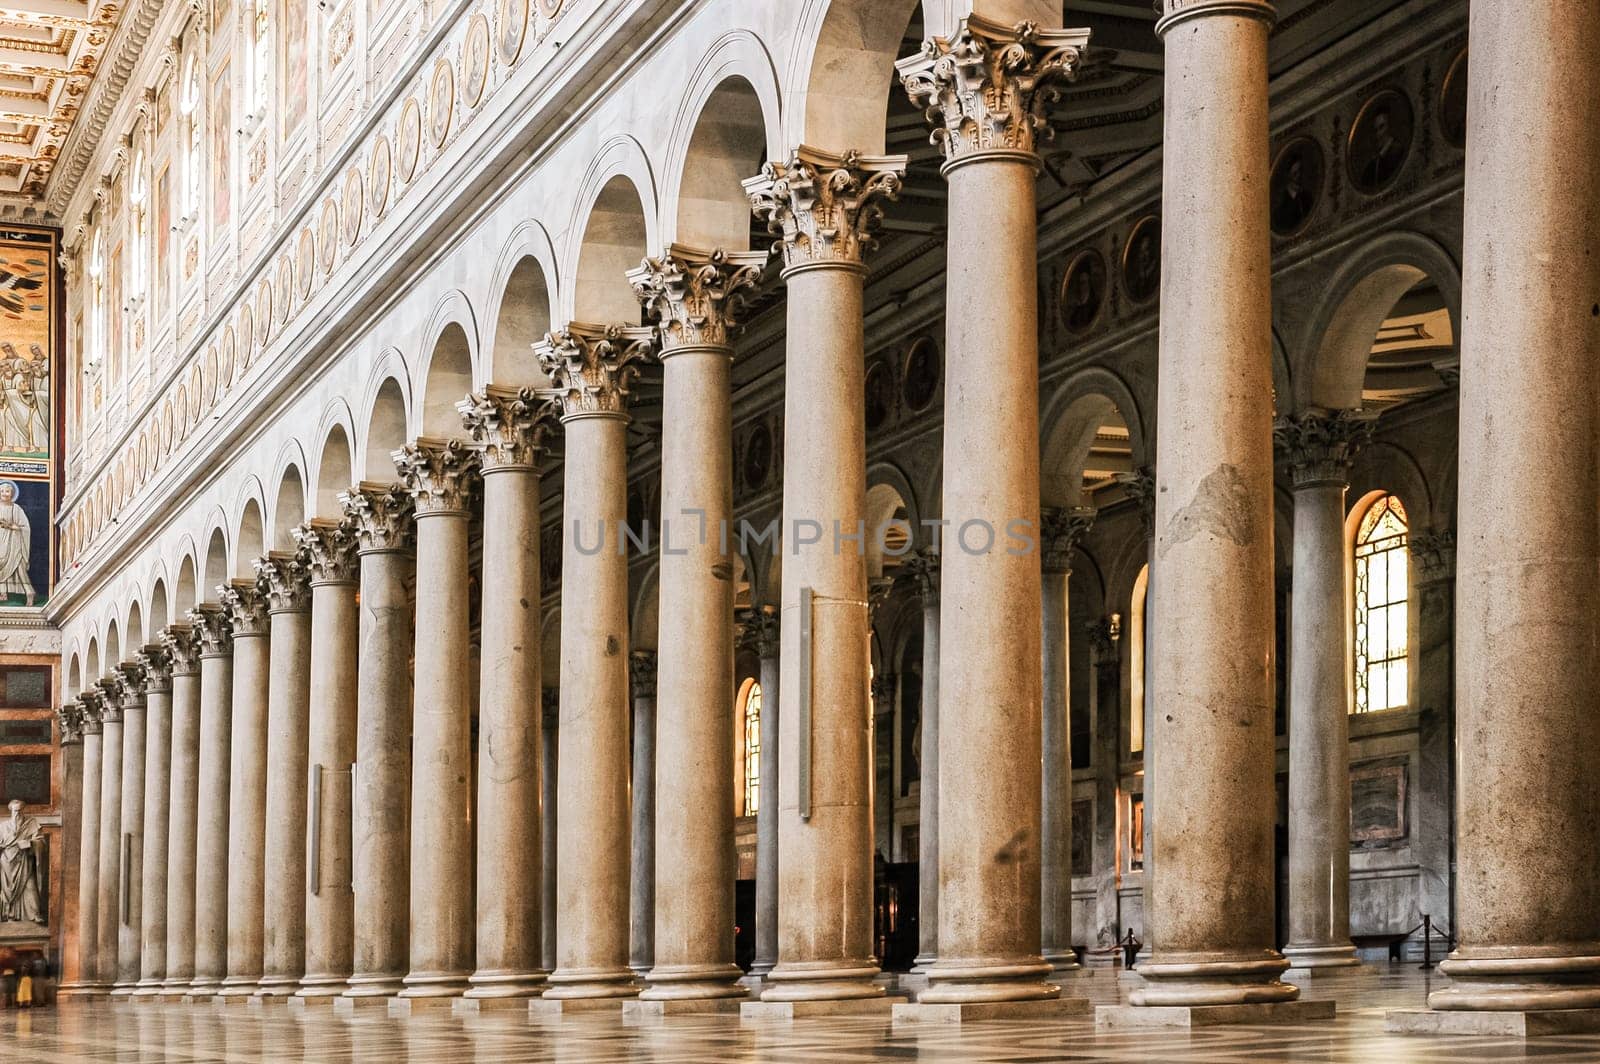 Colonnade in the main nave of the Basilica of Saint Paul Outside the Walls, Rome